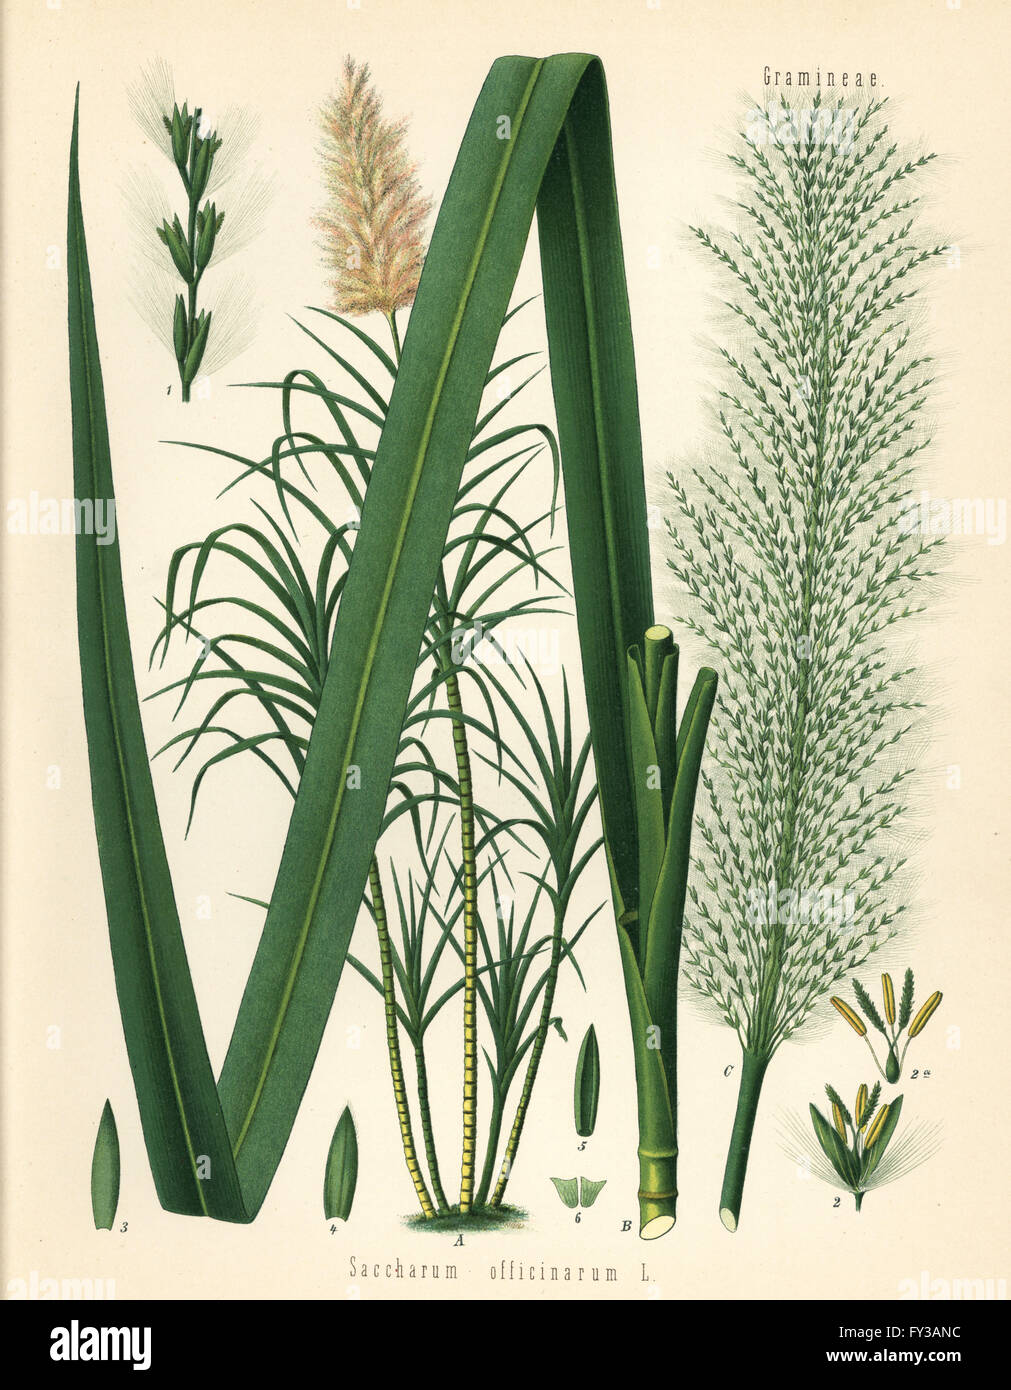 Sugar cane, Saccharum officinarum. Chromolithograph after a botanical illustration from Hermann Adolph Koehler's Medicinal Plants, edited by Gustav Pabst, Koehler, Germany, 1887. Stock Photo